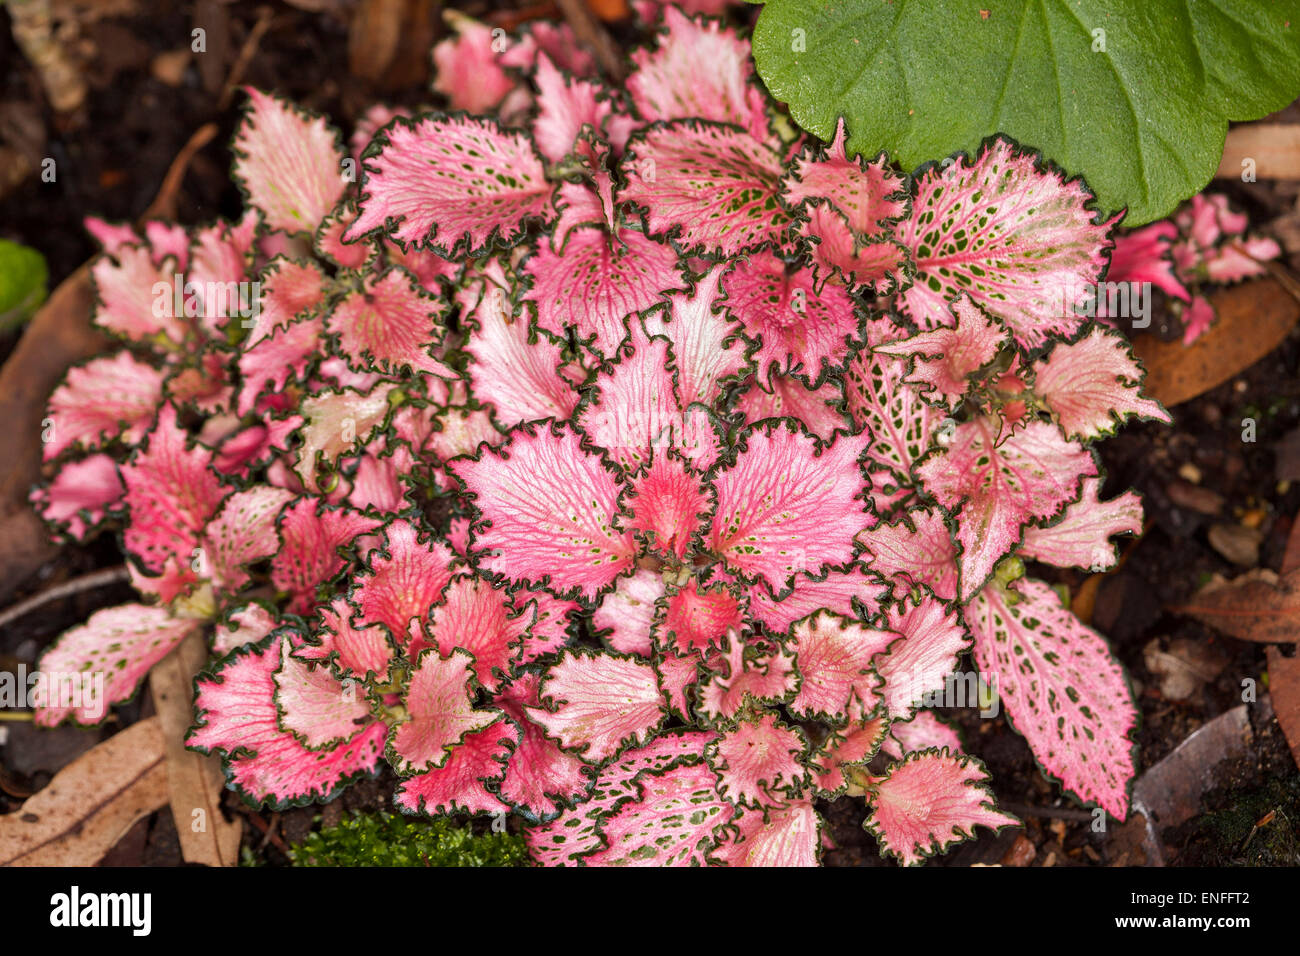 Fittonia albivenis cultivar, Mosaic / Nerve Plant, spectacular bright red and pink leaves with dark green edges, attractive ground cover foliage plant Stock Photo